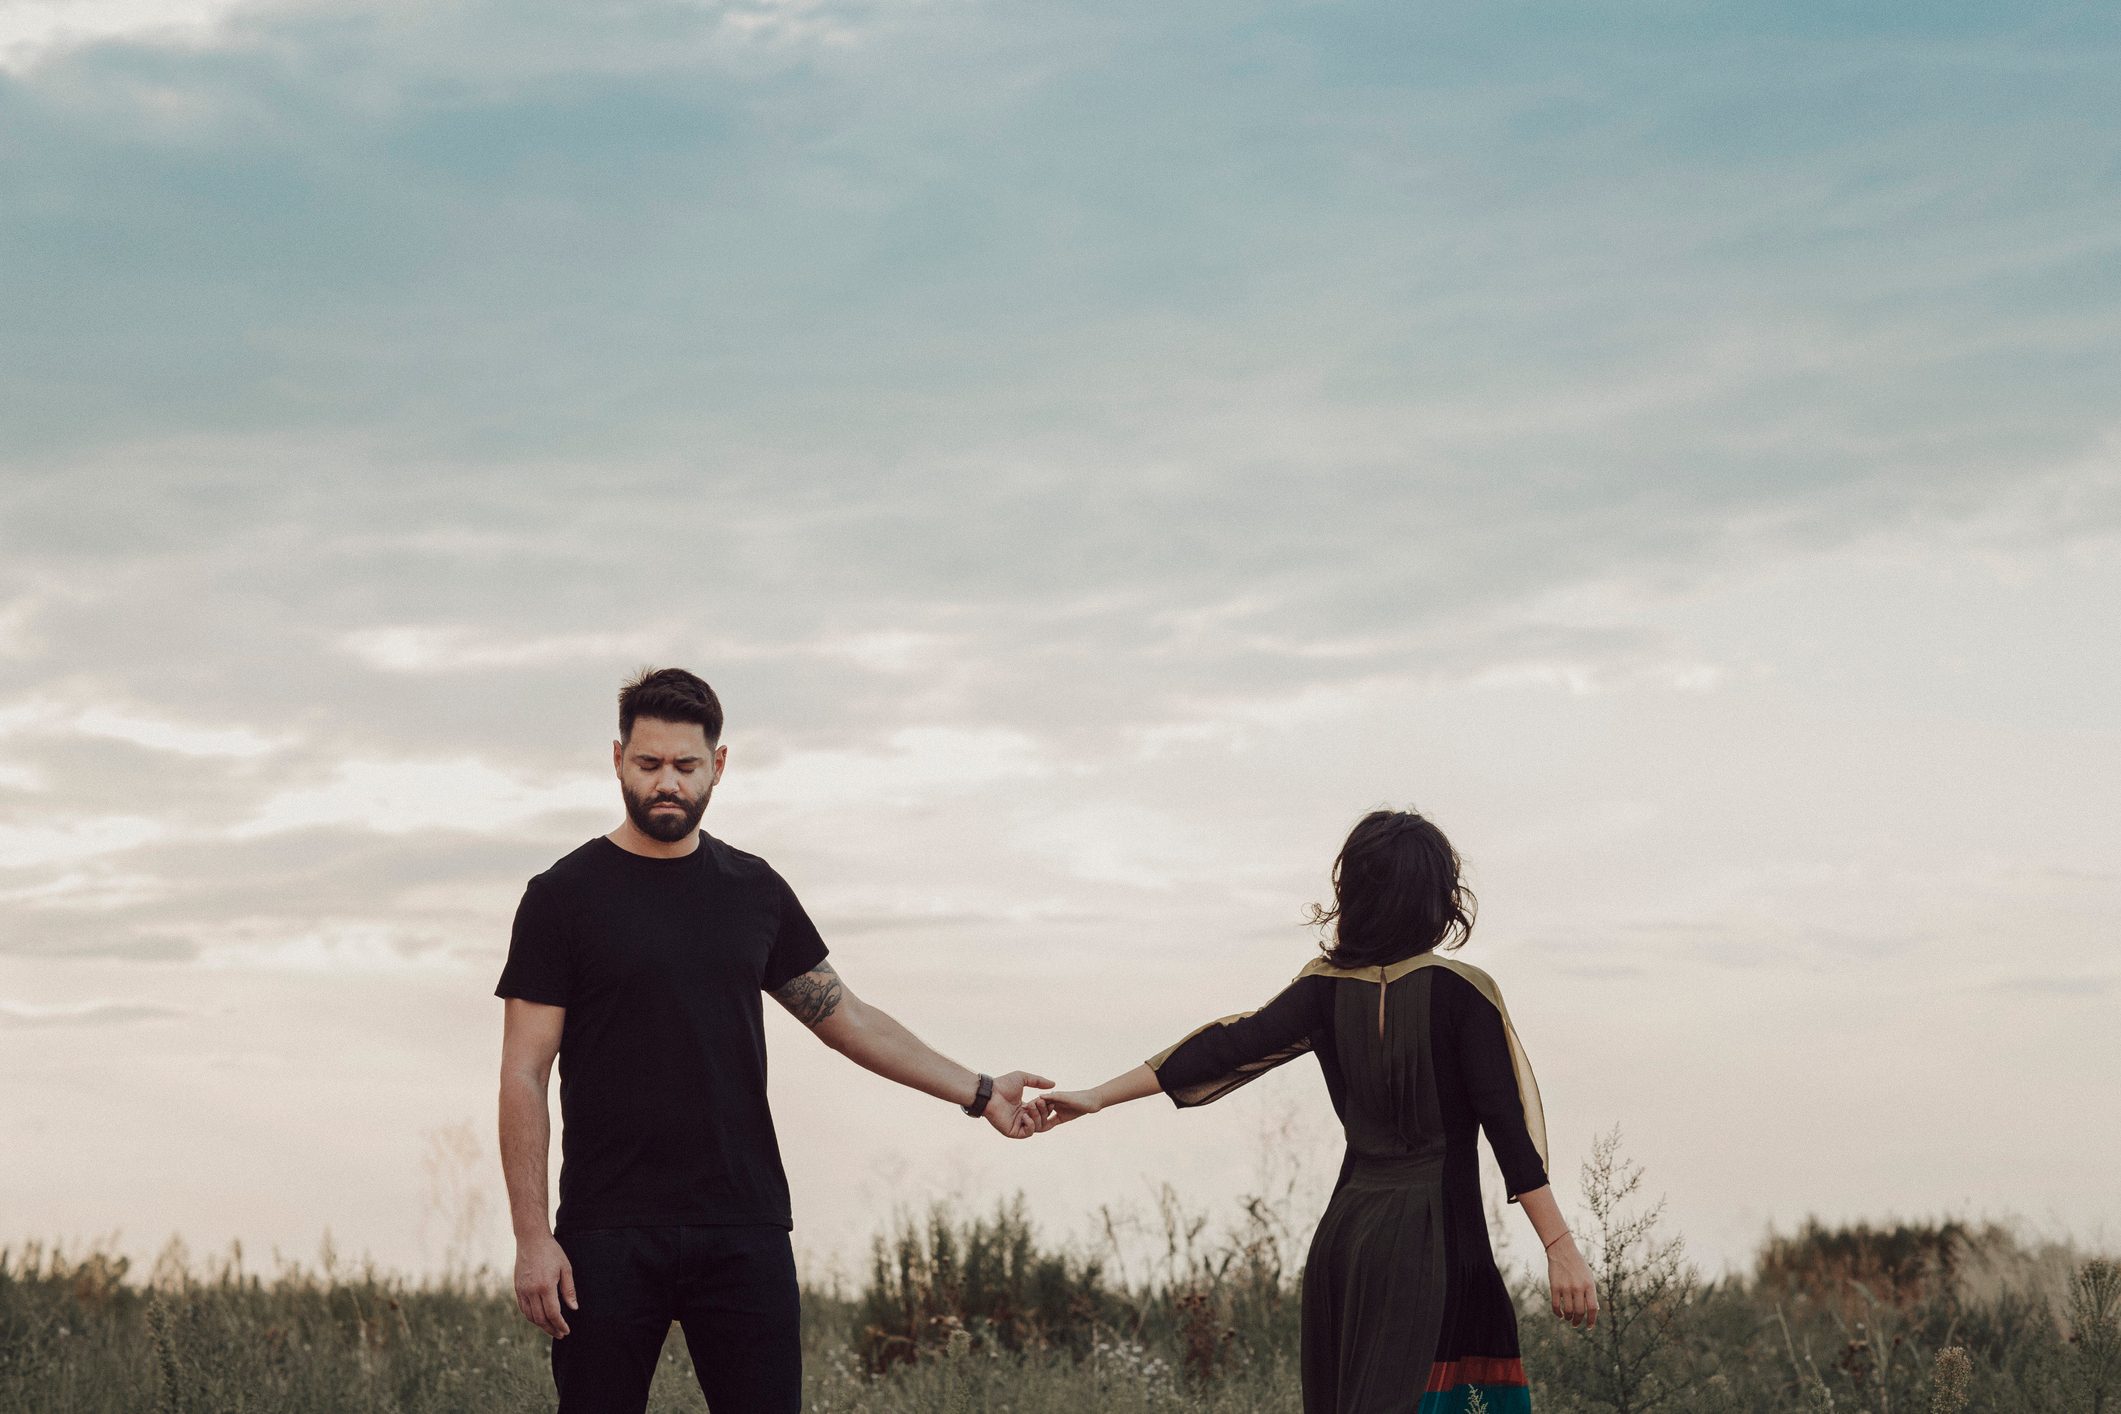 5 Relationship Deal Breakers That Suggest It's Time to Move on